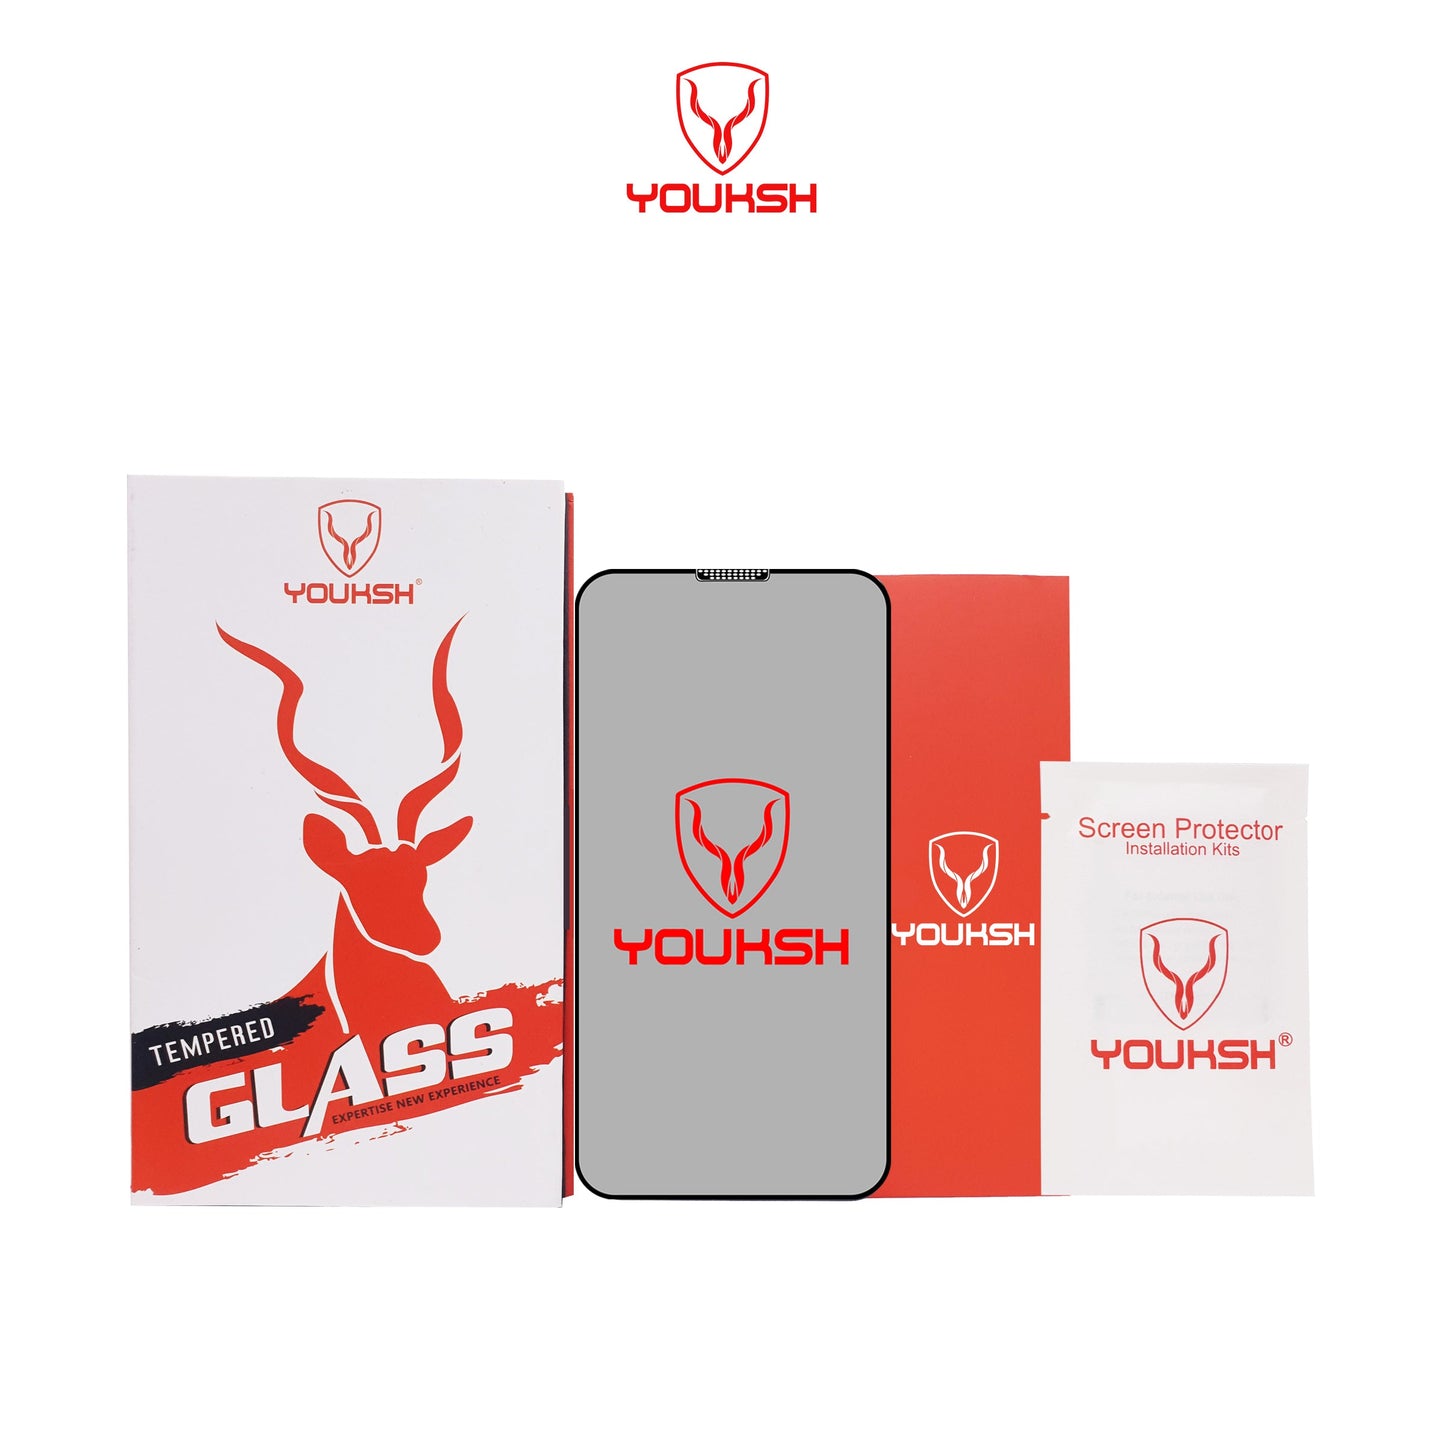 YOUKSH Apple iPhone 14 (6.1) Privacy Anti Dust Glass Protector - YOUKSH Apple iPhone 14 (6.1) Anti Static Anti Dust Glass Protector - With YOUKSH Installation kit.